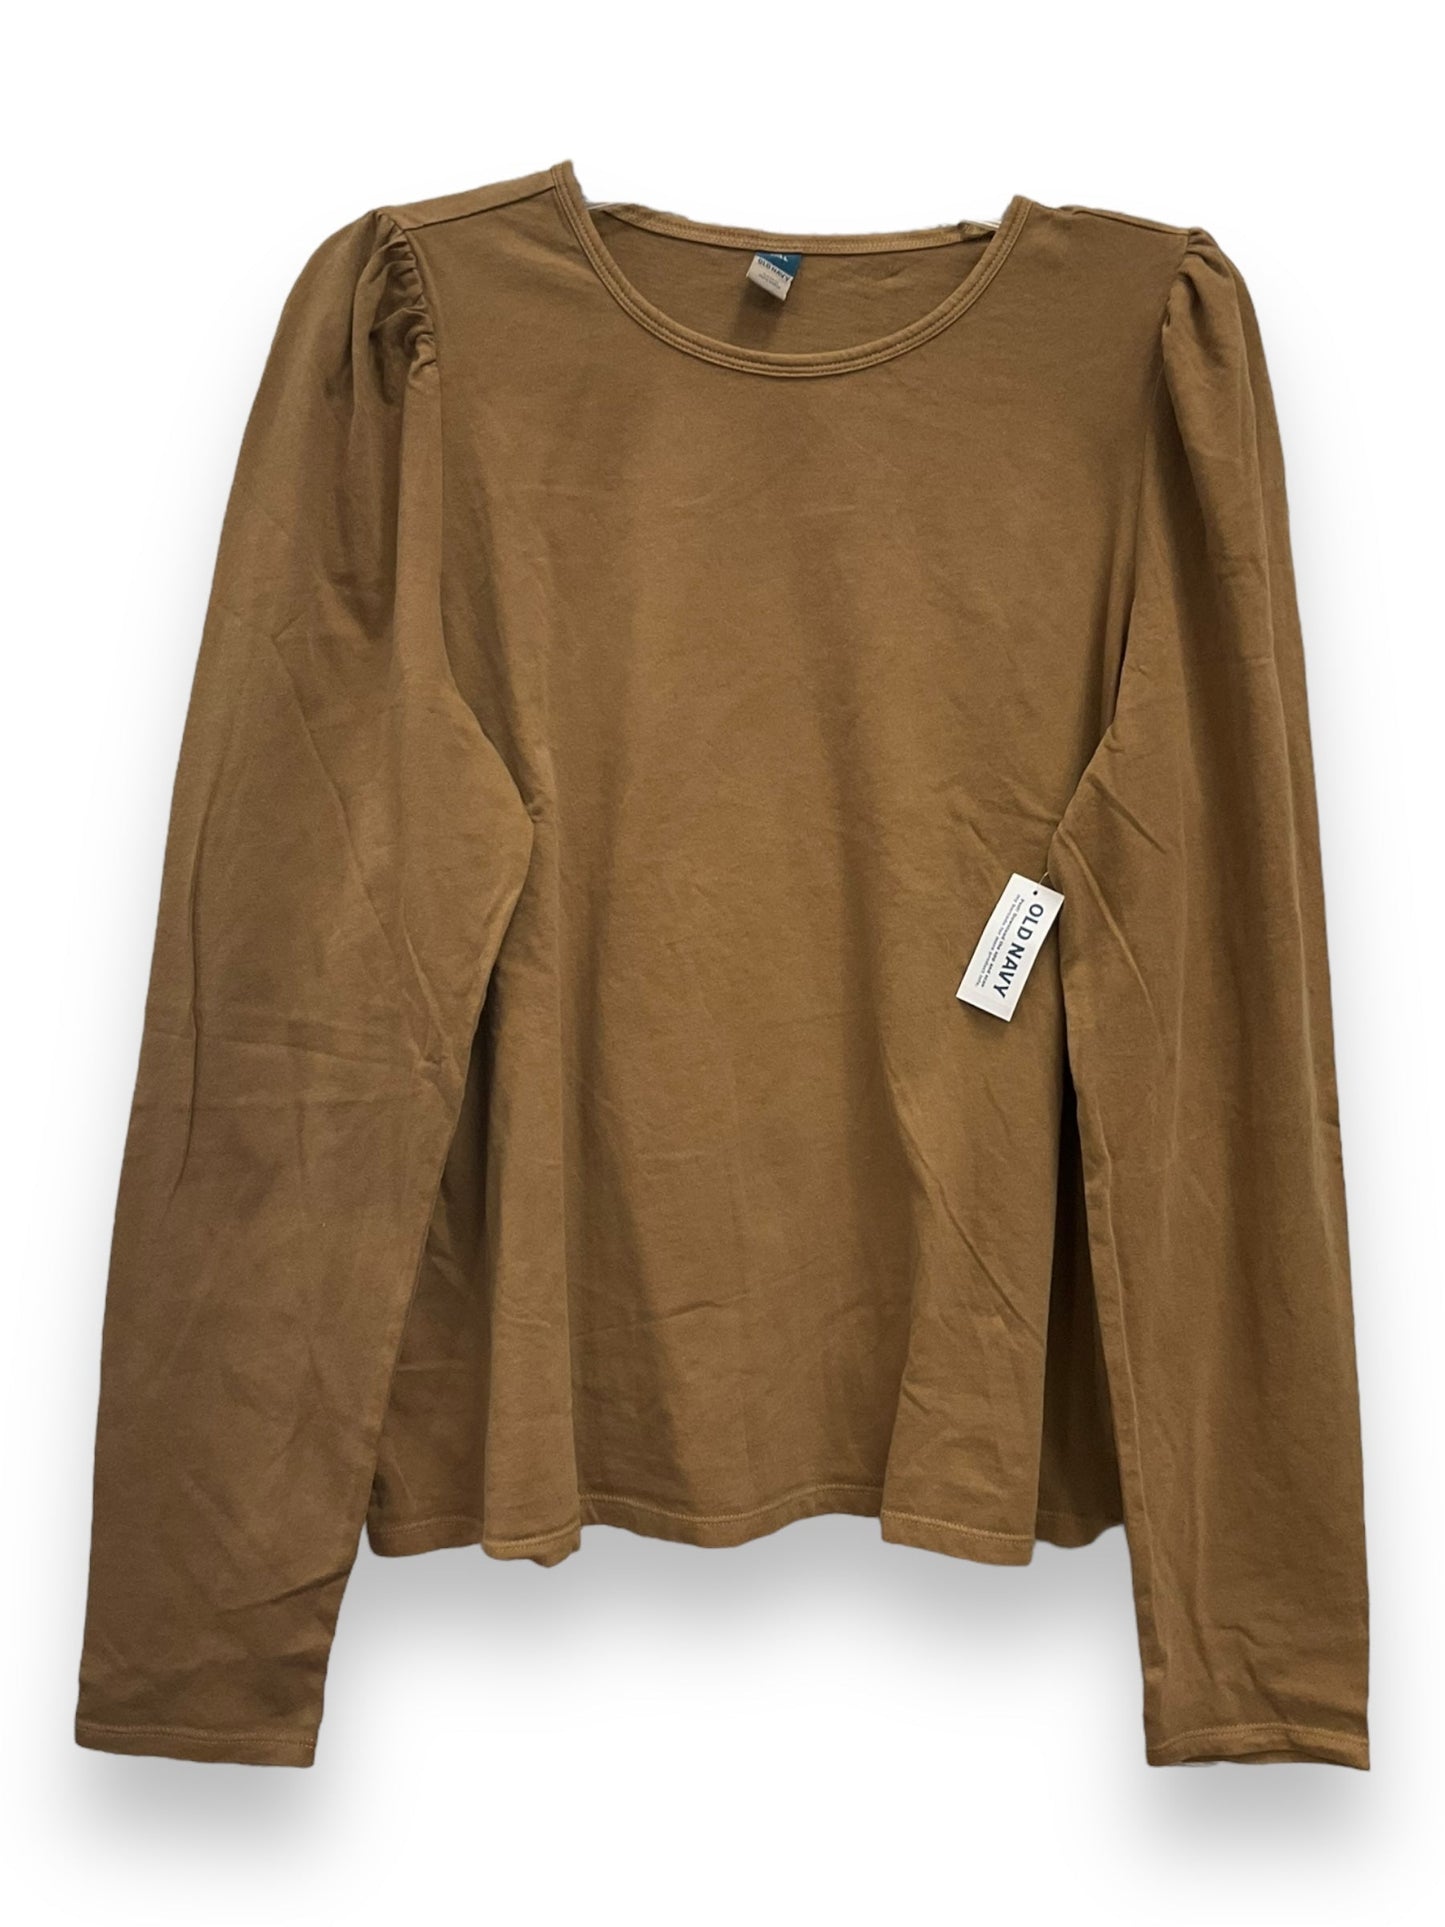 Brown Top Long Sleeve Basic Old Navy, Size L